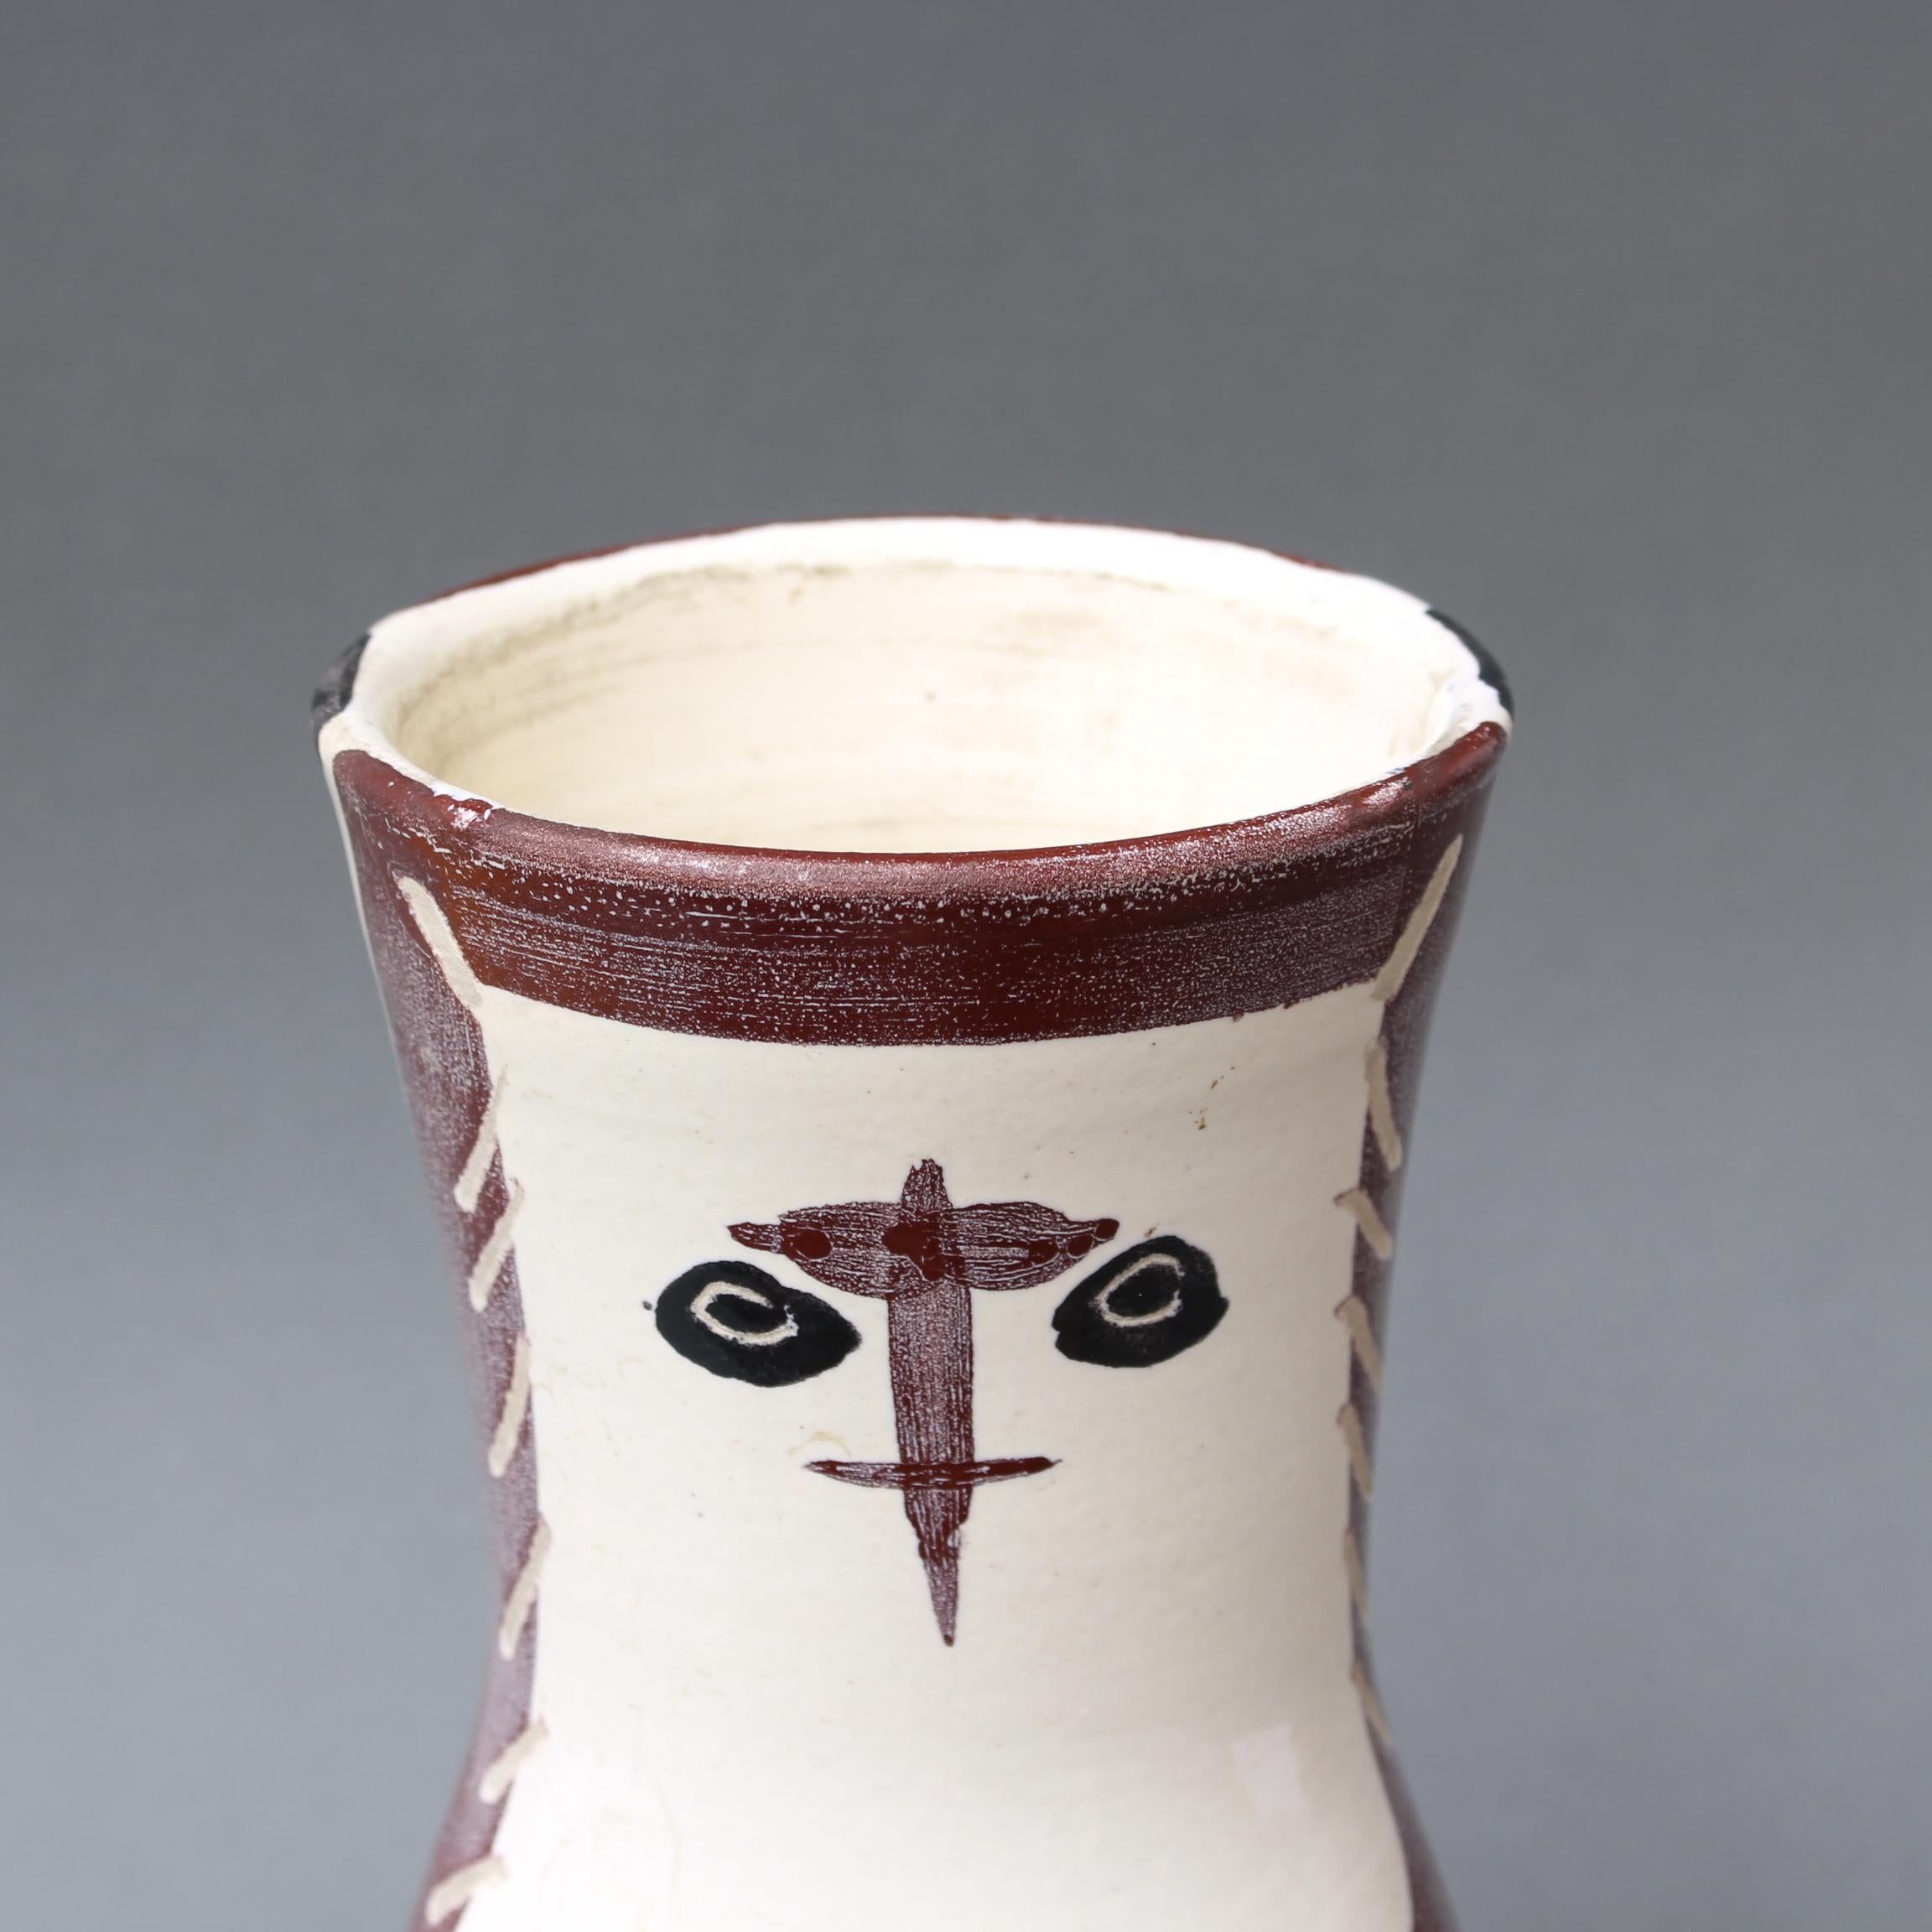 Ceramic Owl Vase (A.R. 135) from the Madoura Pottery by Pablo Picasso For Sale 12